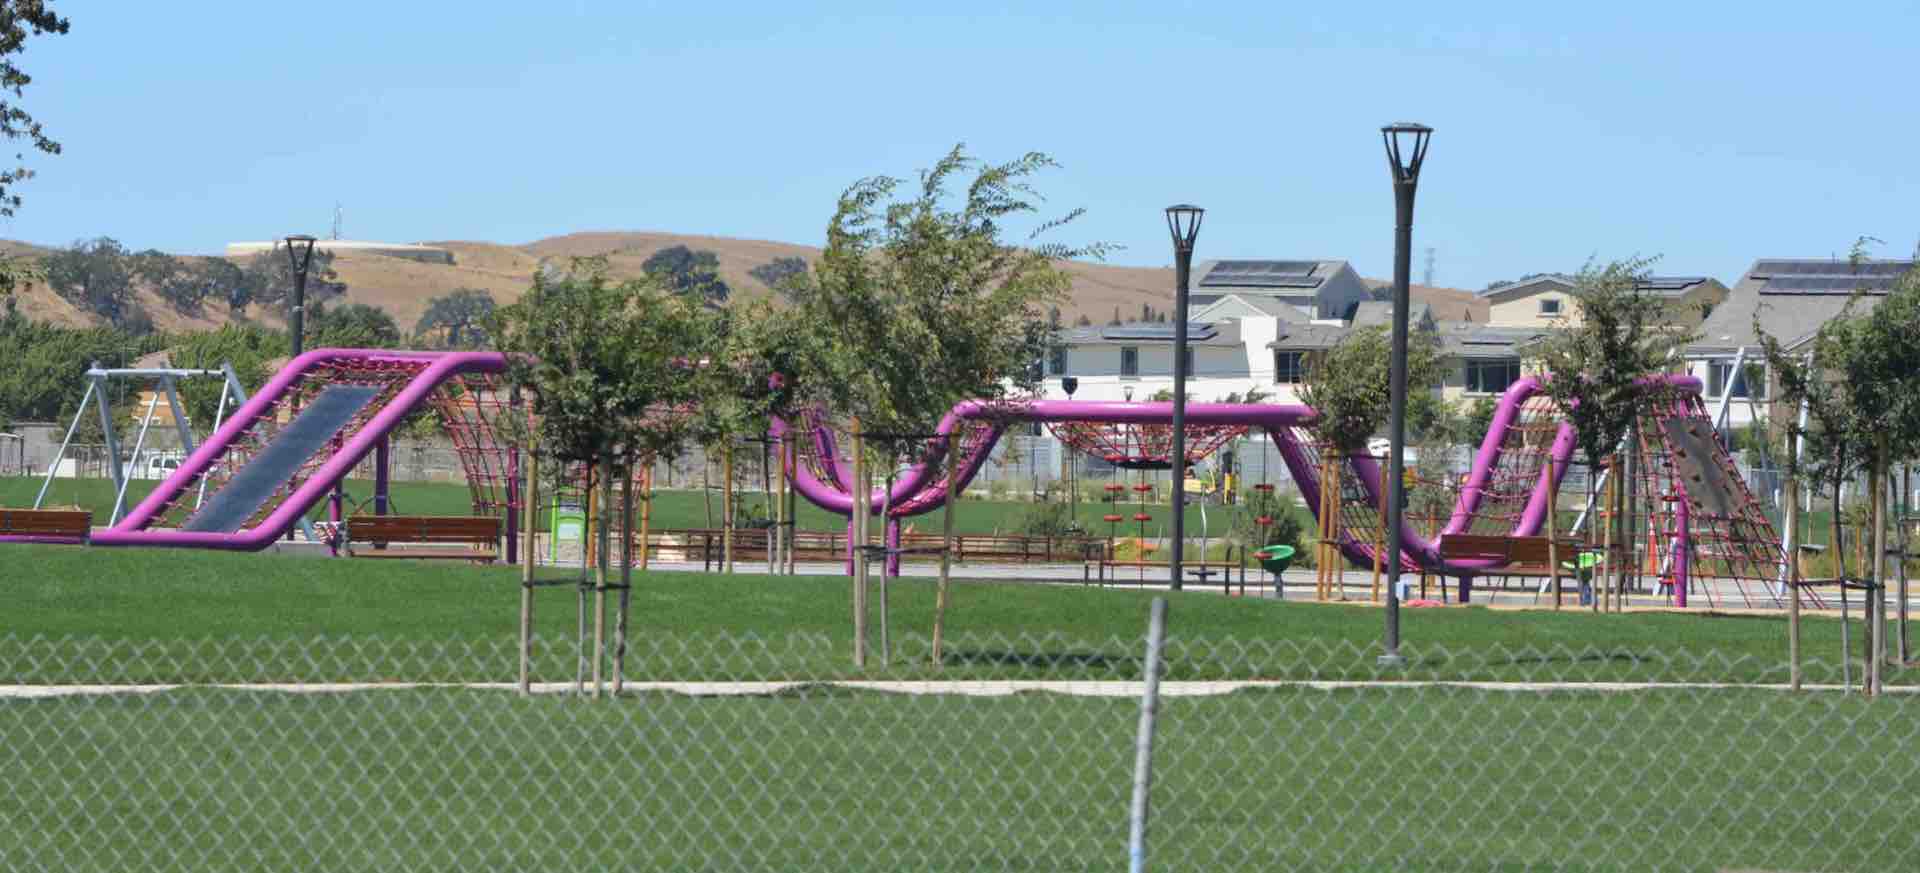 Purple playground element surrounded by green grass at a local park.